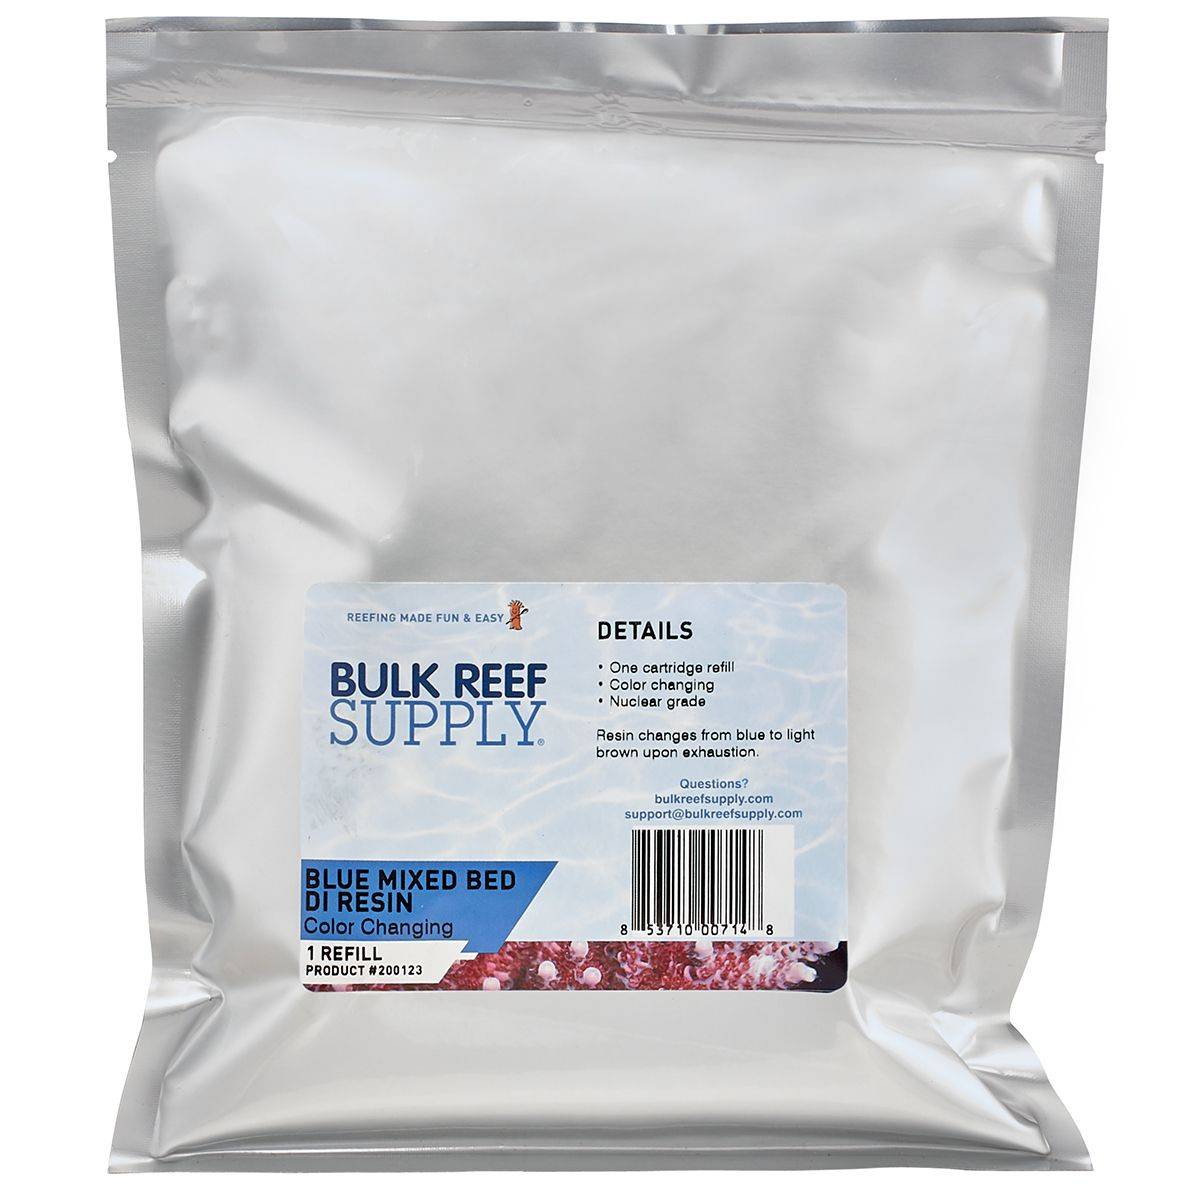 Bulk Reef Supply One Cartridge Refill (1.25 lbs.) DI Resin (Color Changing)